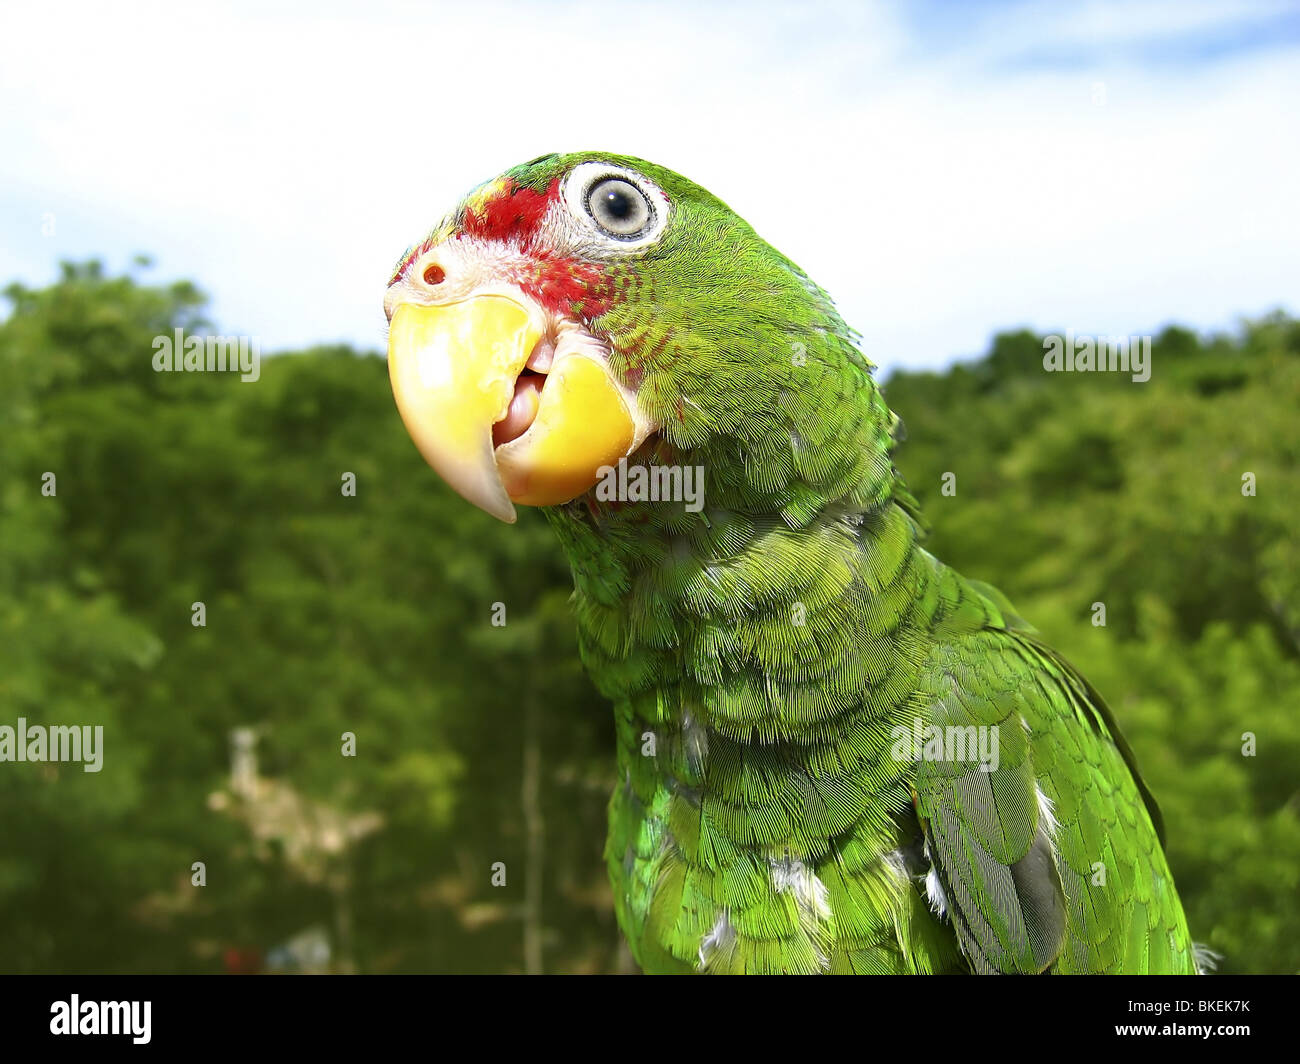 cotorra parrot green from Central America Mexico jungle Stock Photo